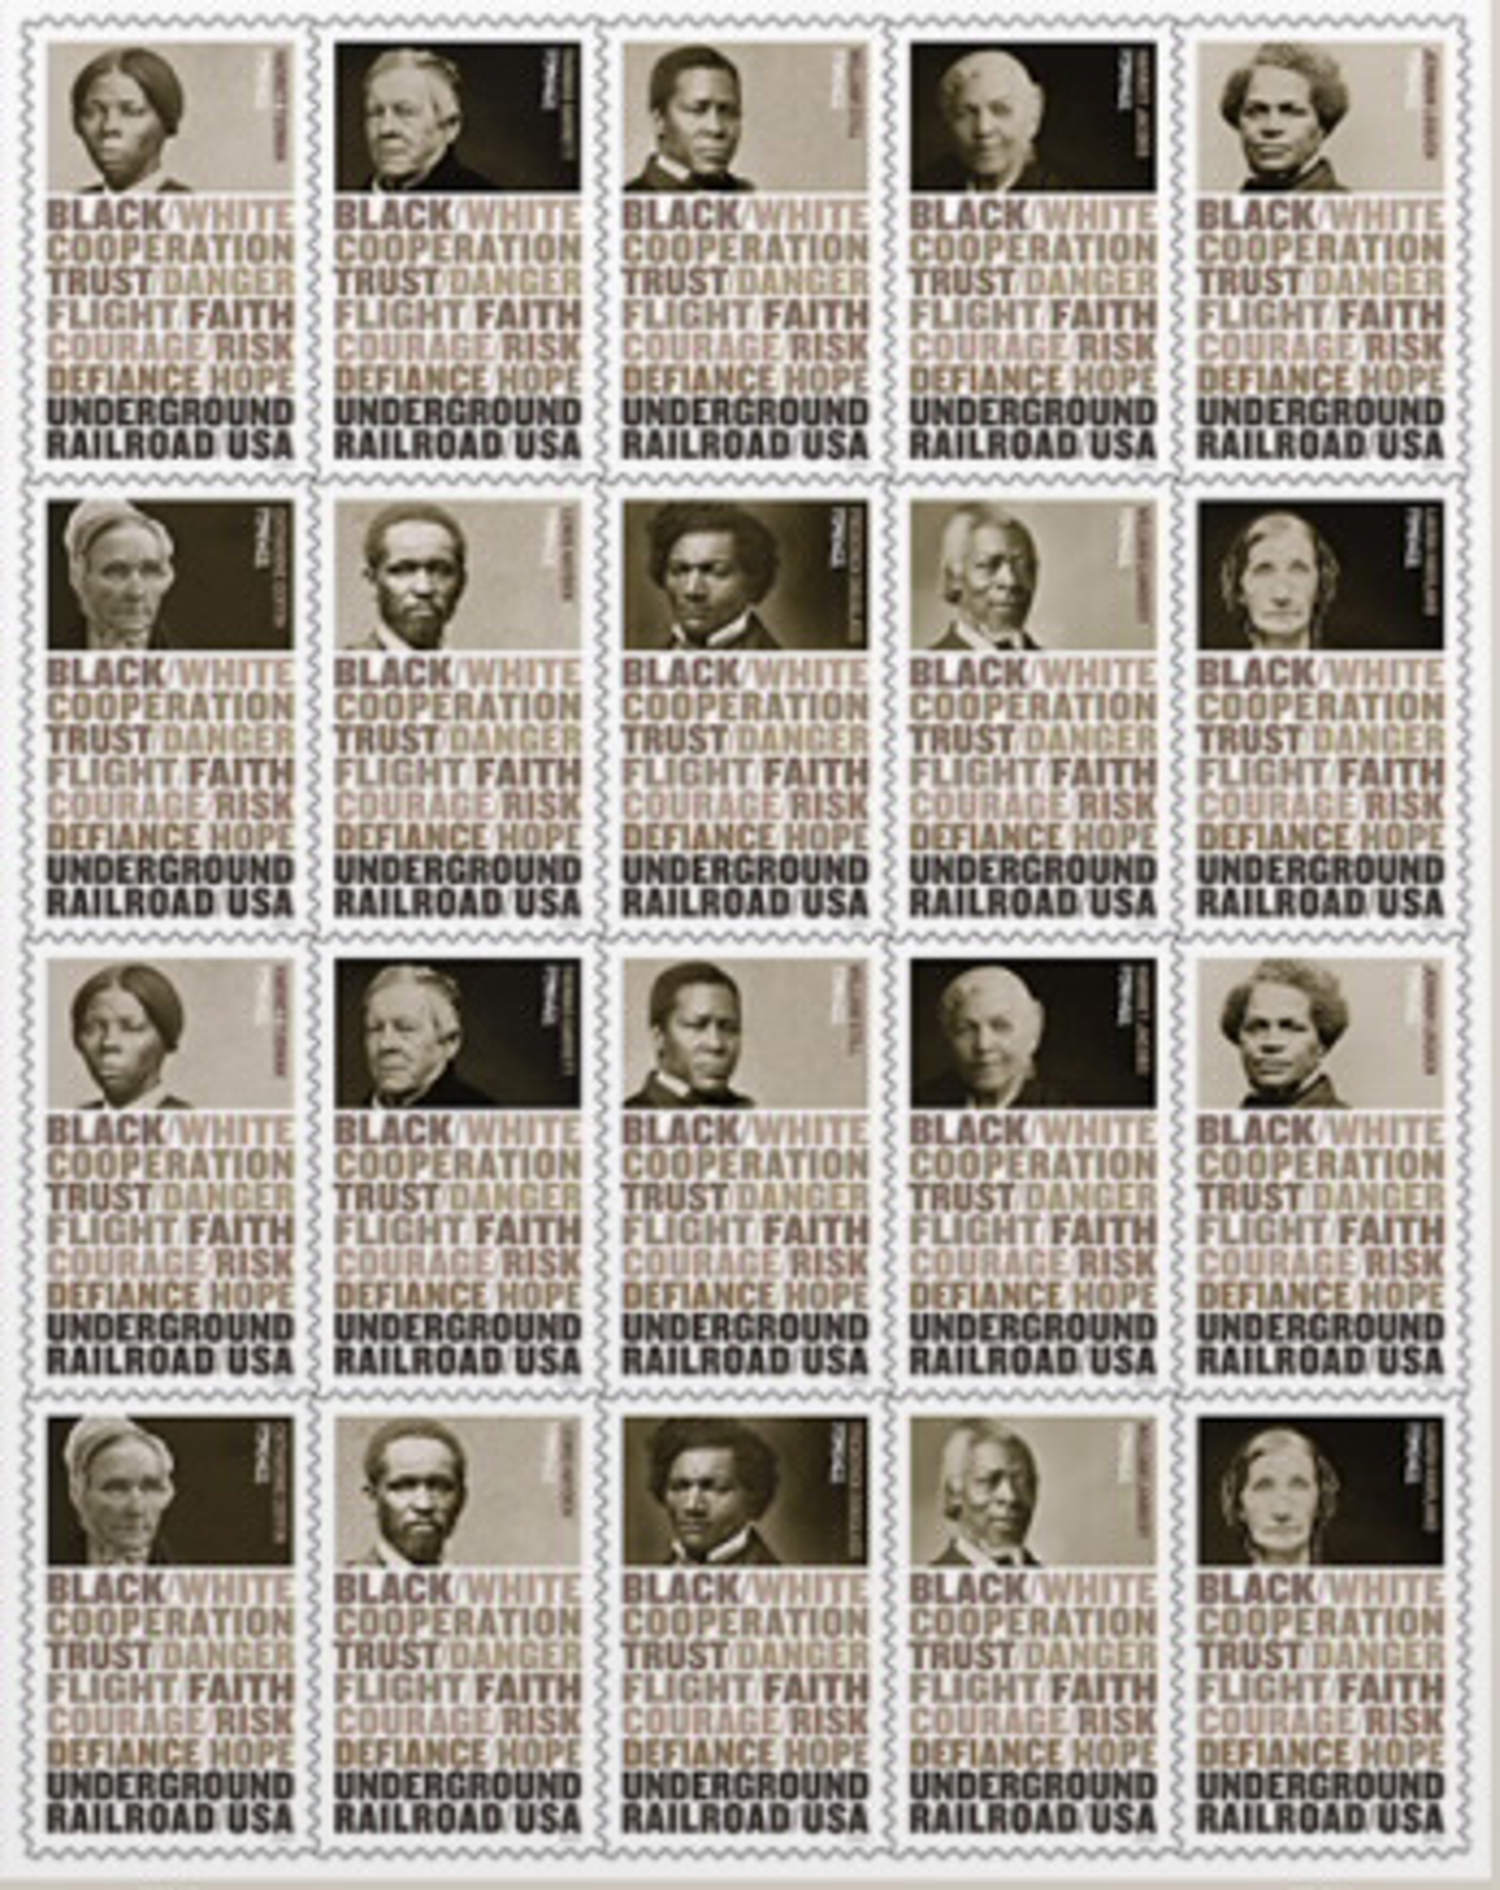 The release of these Underground Railroad stamps couldn’t come at a better time  